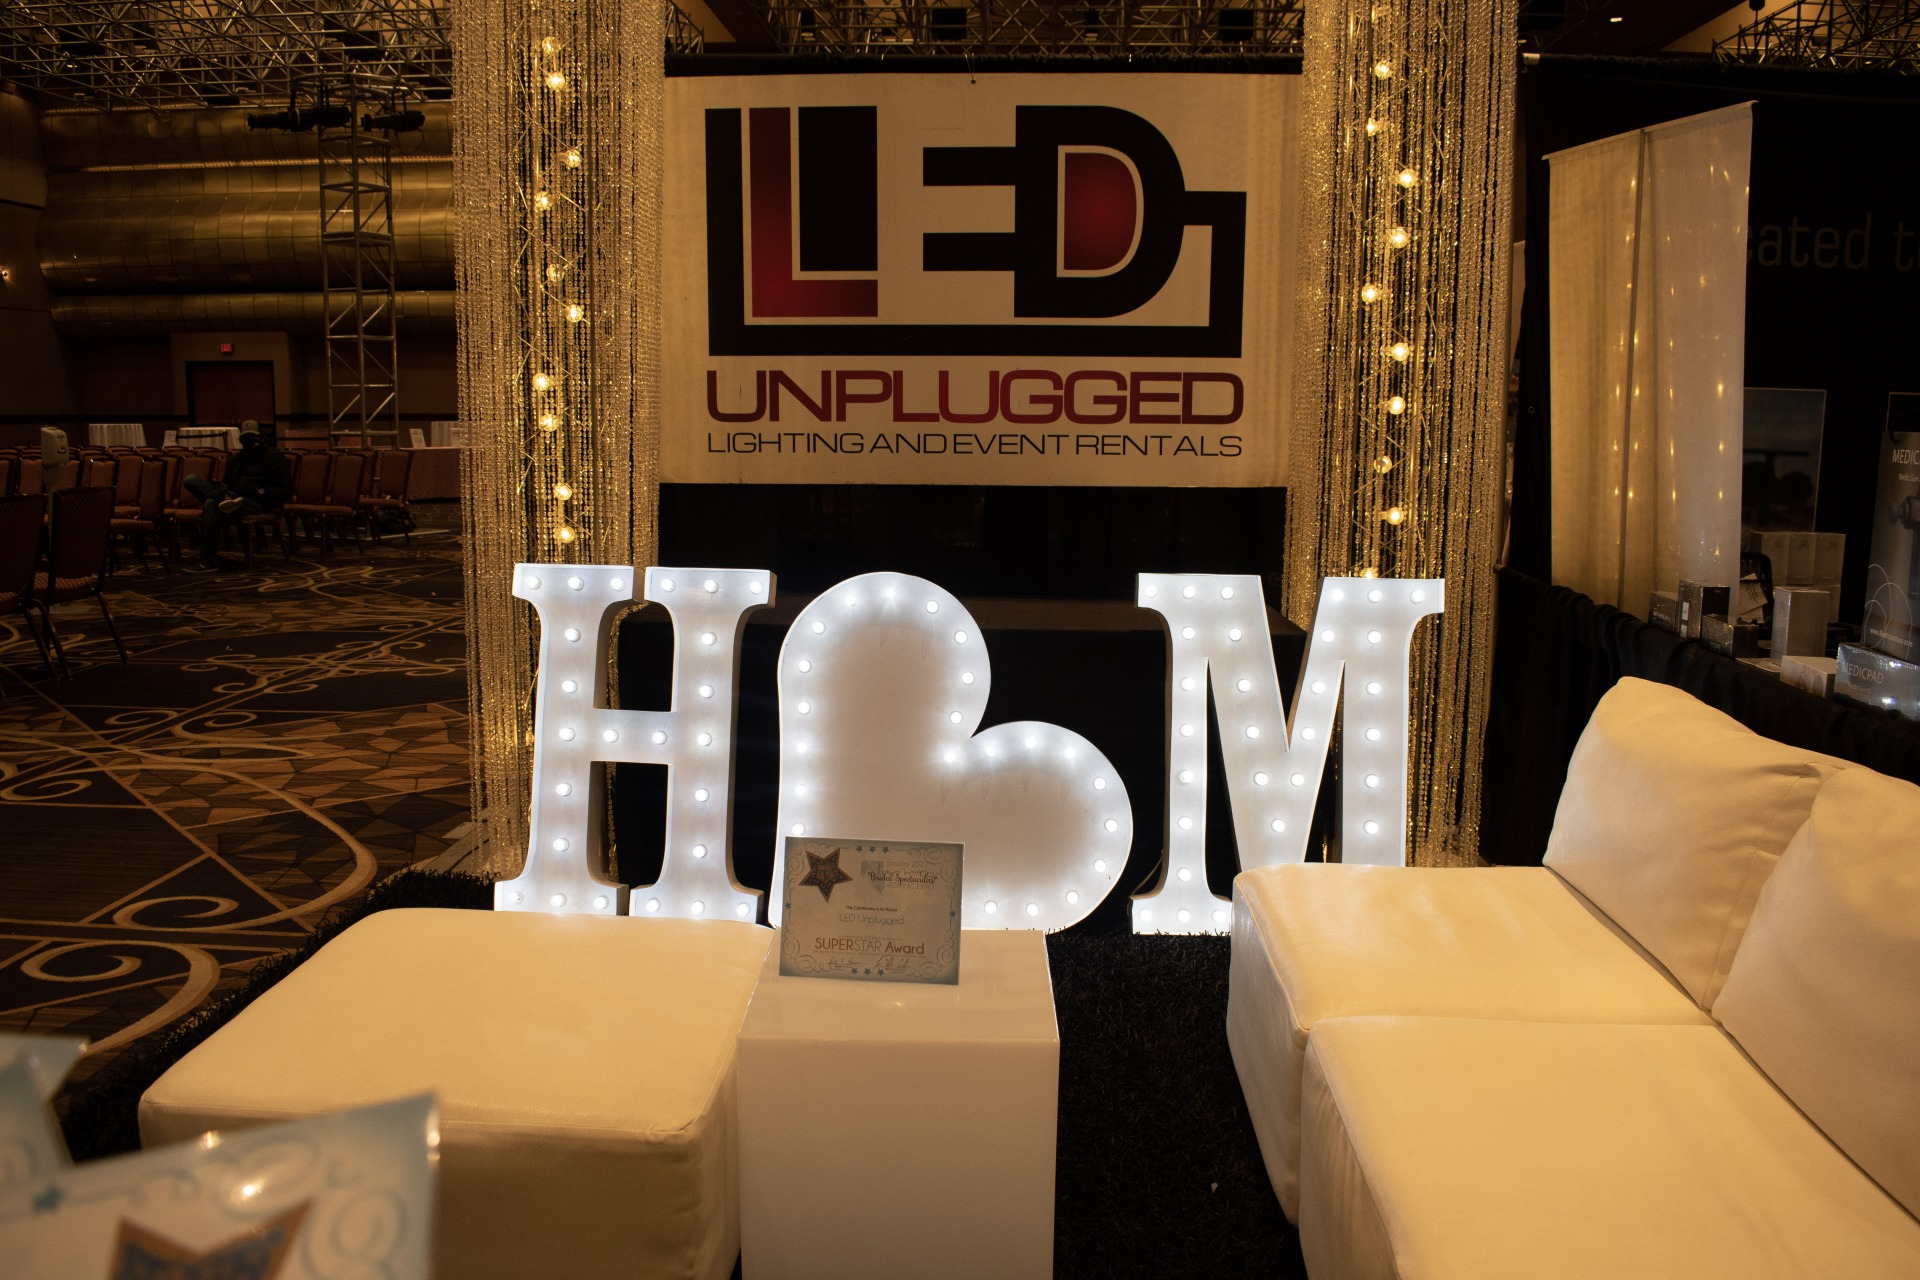 LED Unplugged receives star award for attending 25 Bridal Spectacular Events.